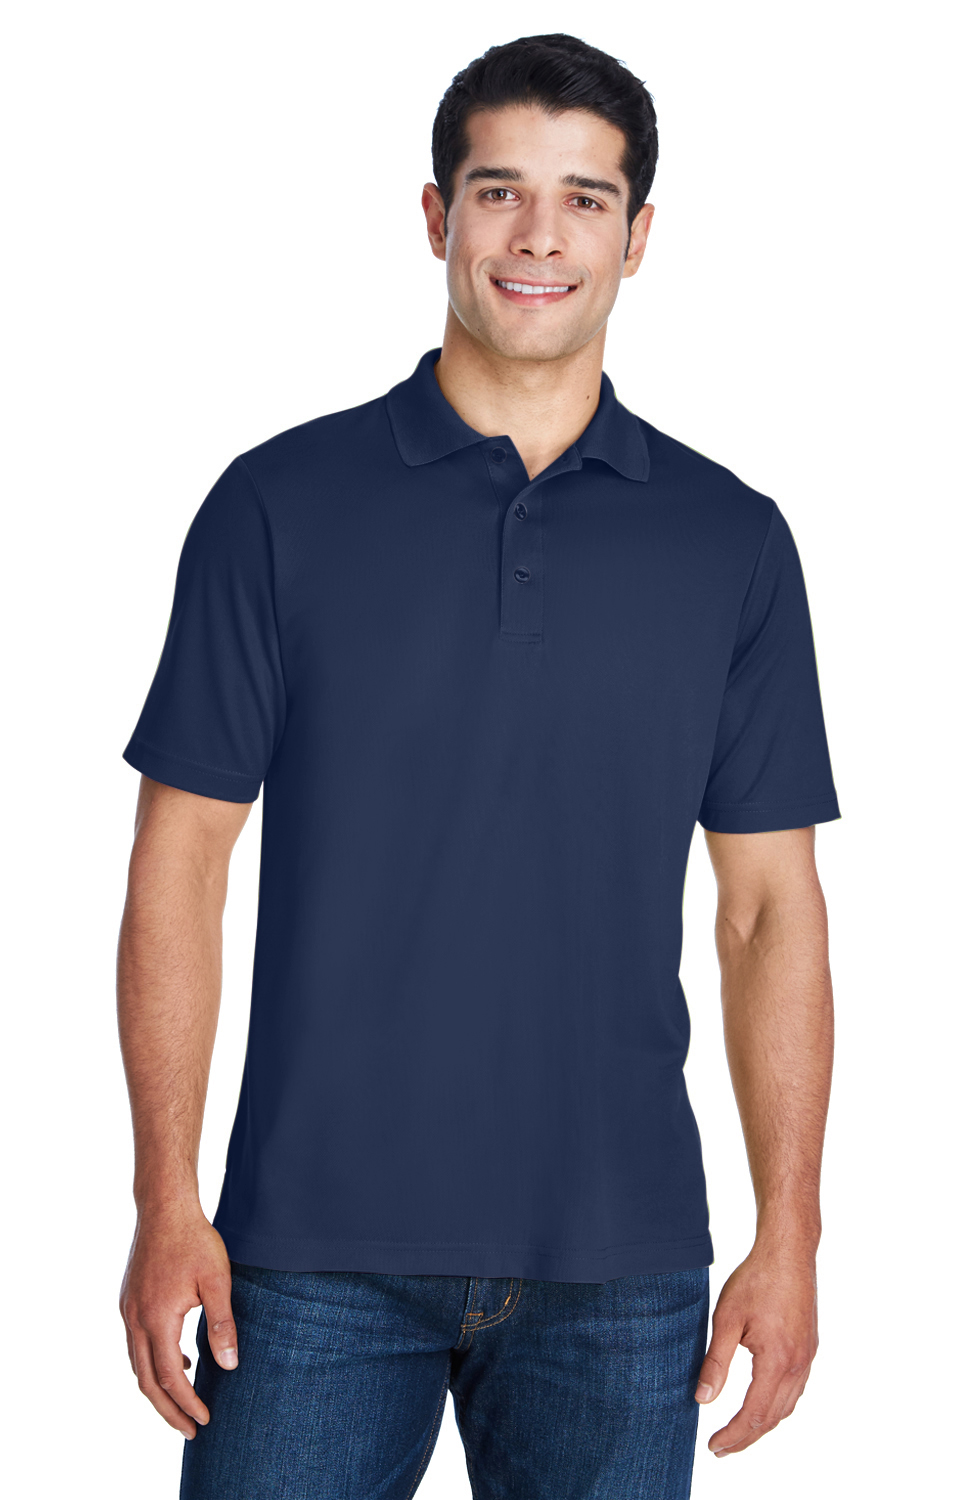 5xlt polo,Free delivery,www.workscom.com.br